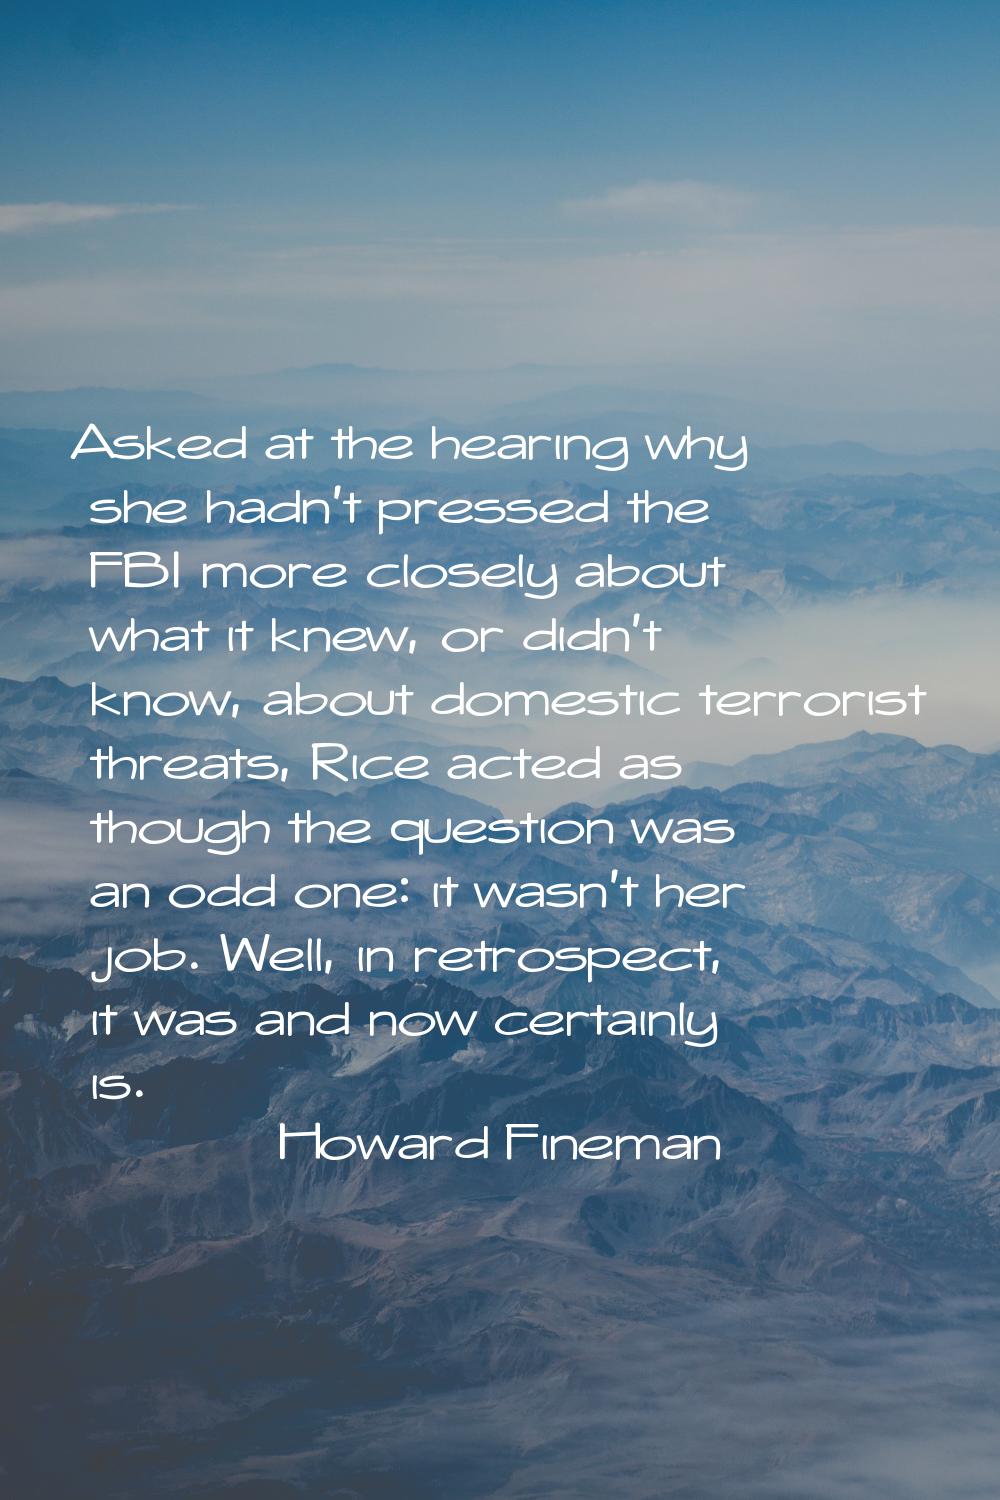 Asked at the hearing why she hadn't pressed the FBI more closely about what it knew, or didn't know